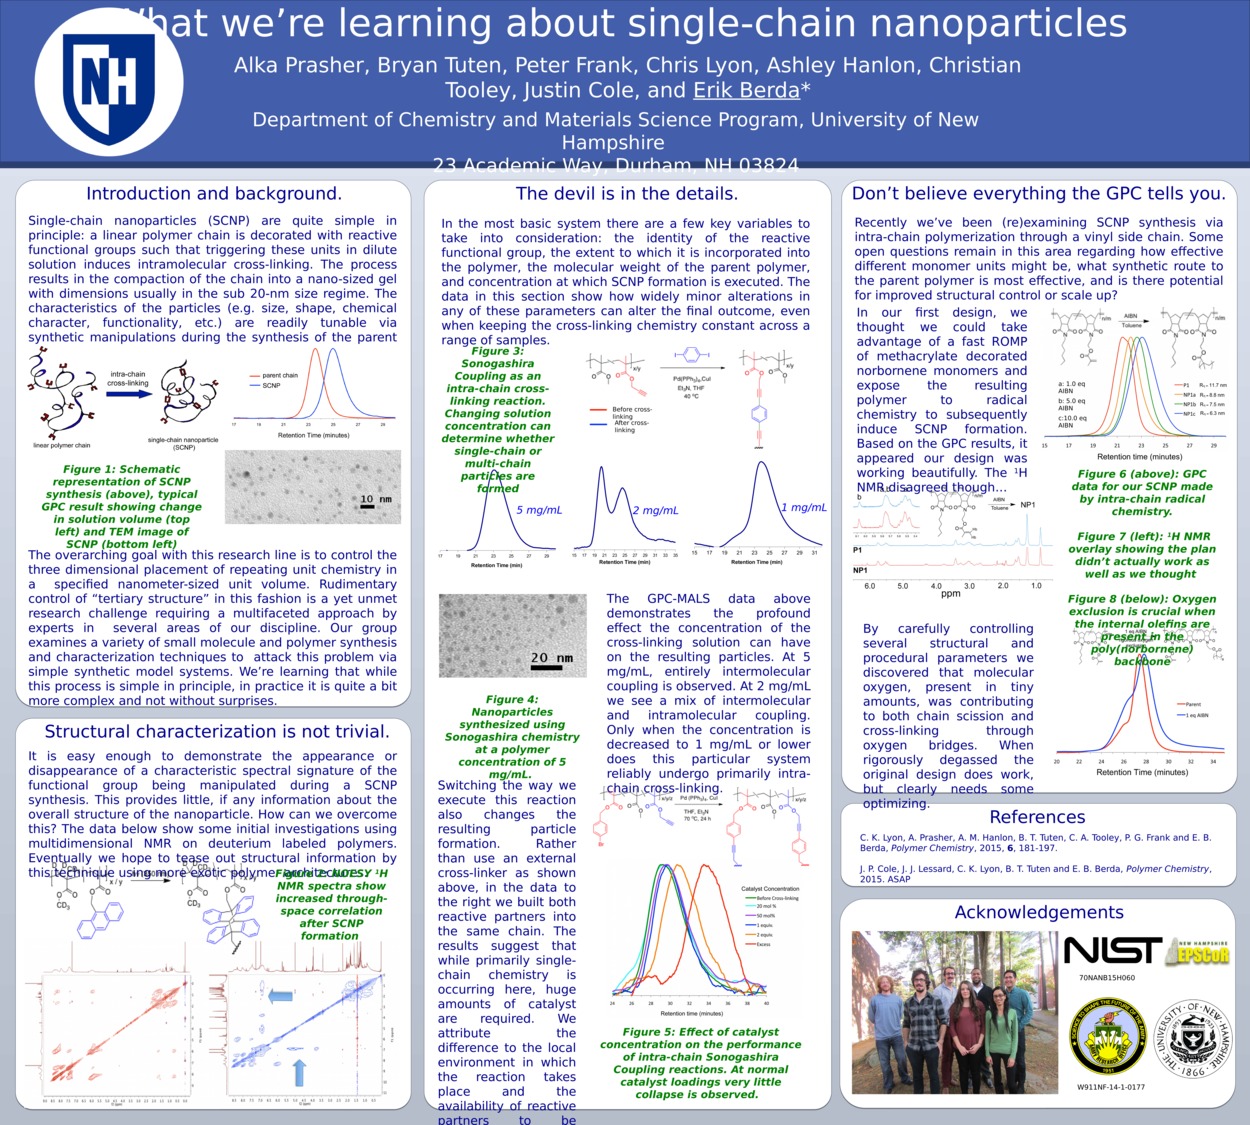 What We're Learning About Single-Chain Nanoparticles by ckq35